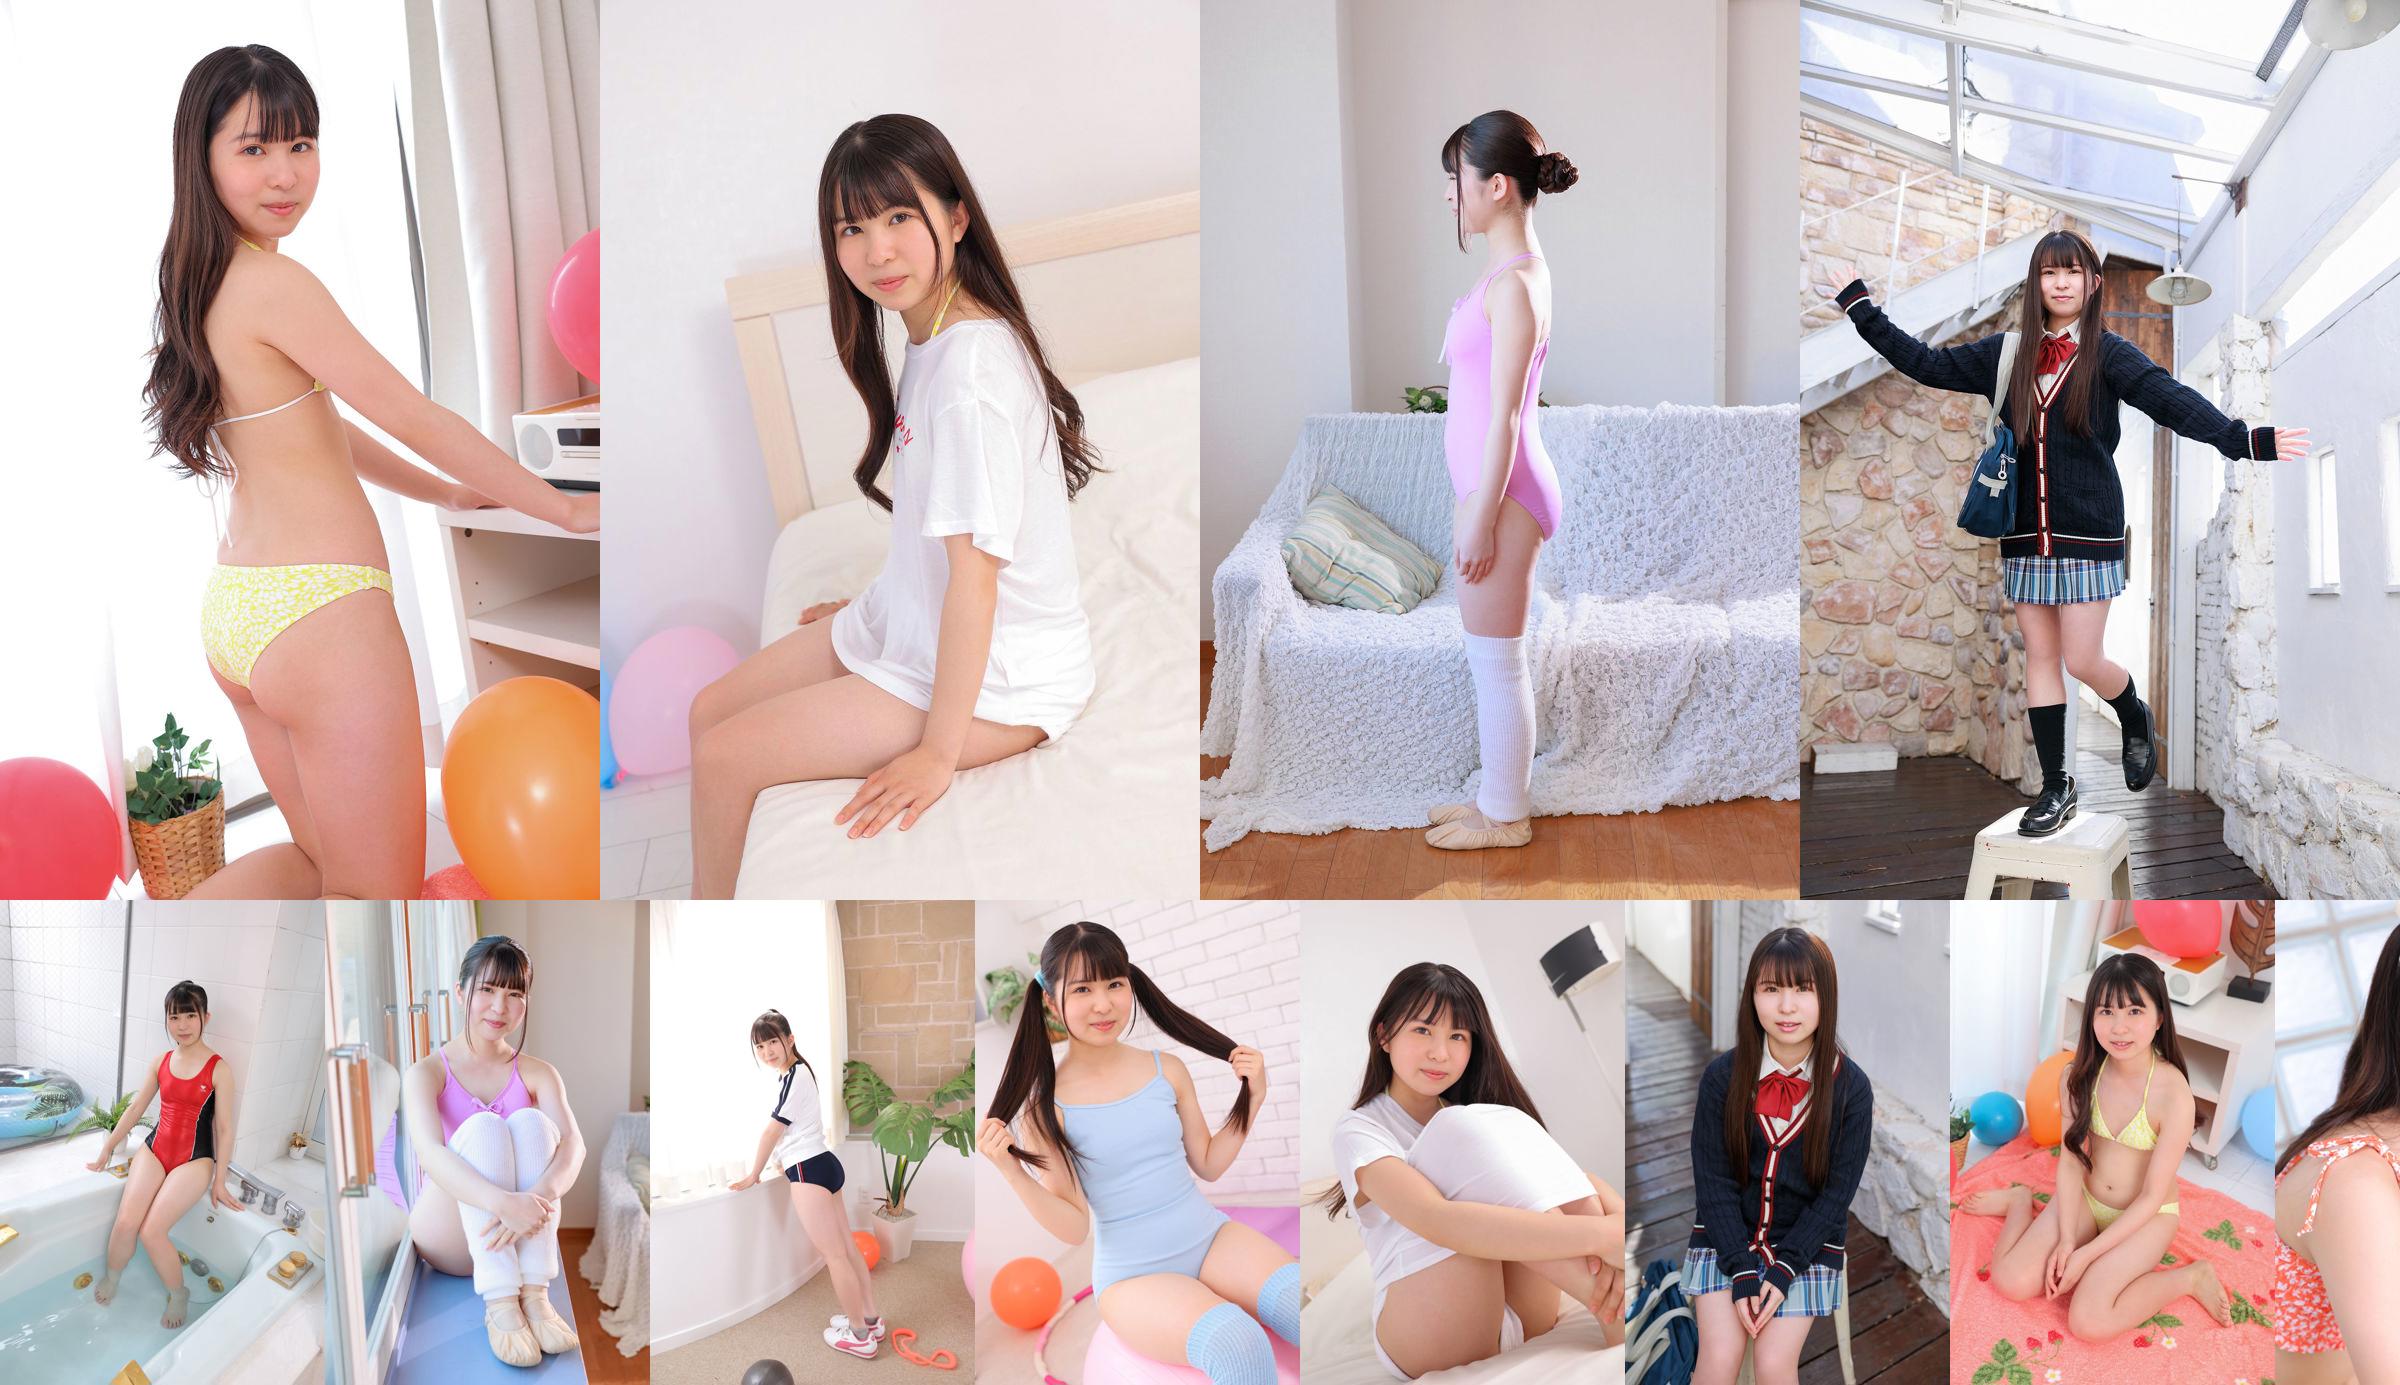 [Minisuka.tv] The Coconuts 心乃うみ - Regular Gallery No.f43a4d Page 5